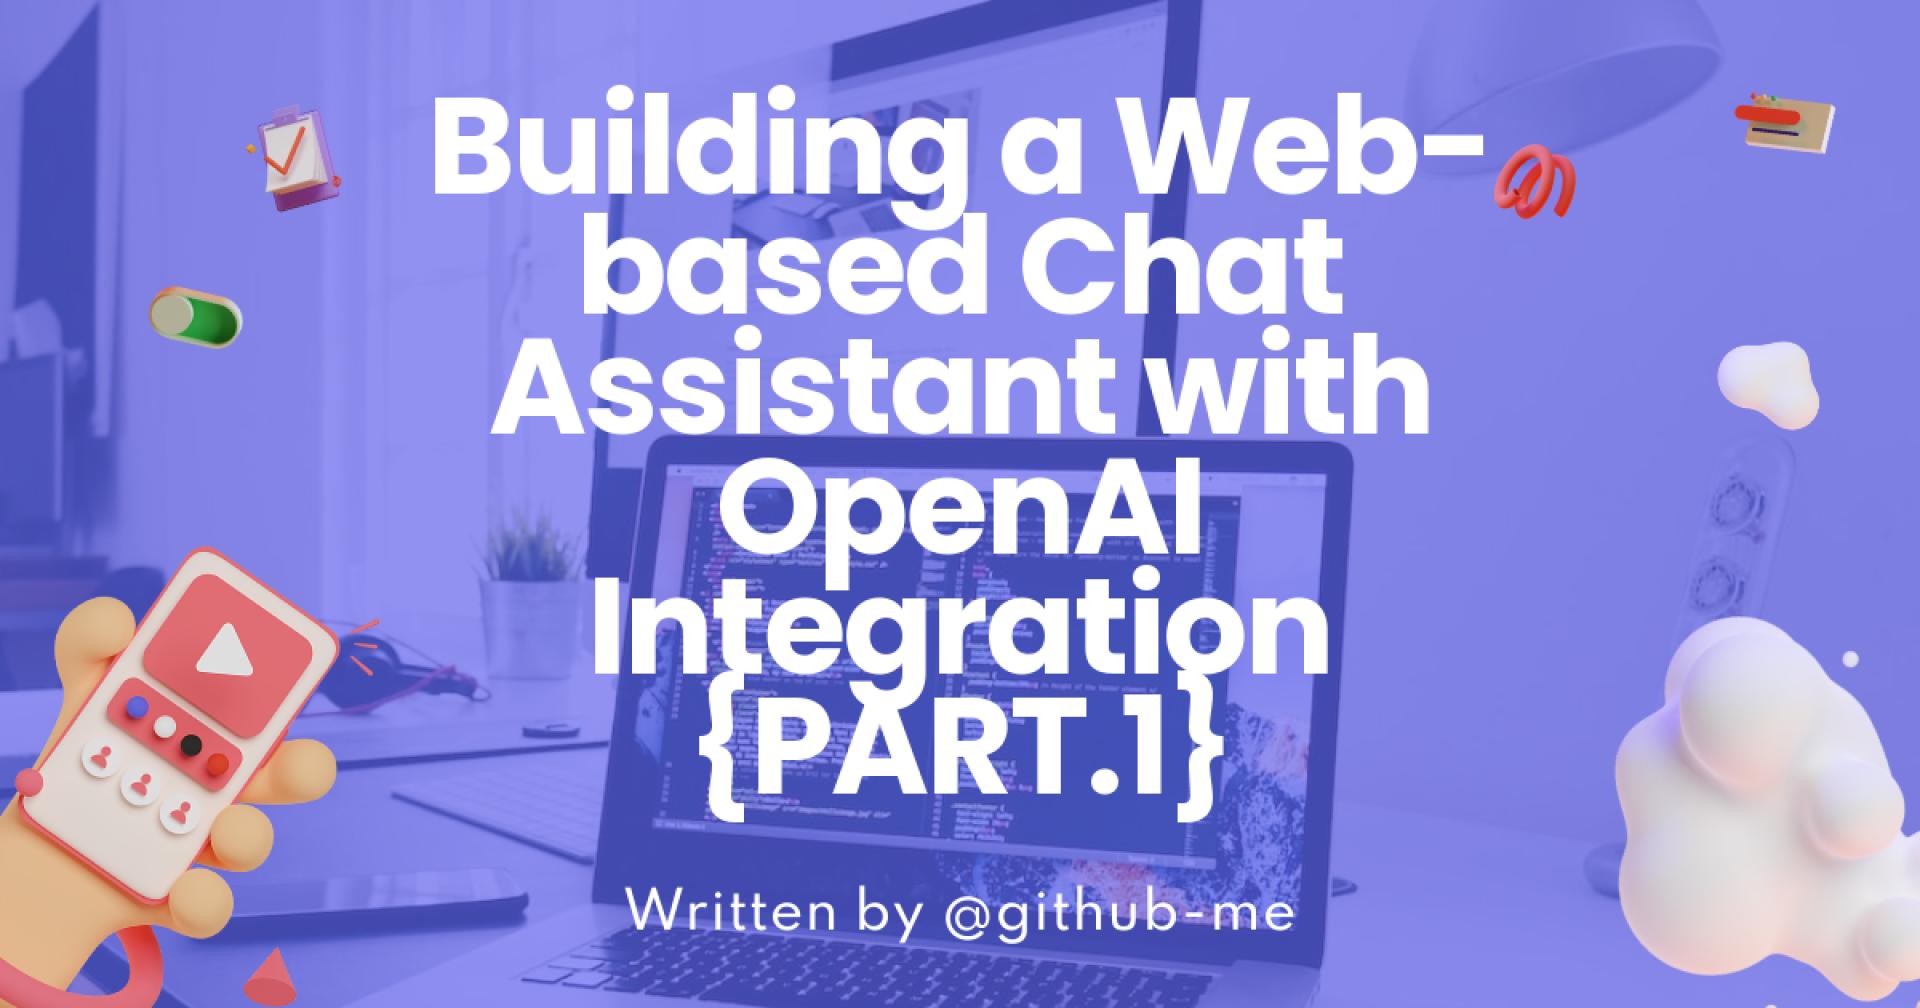 Building a Web-based Chat Assistant with OpenAI Integration {PART.1}